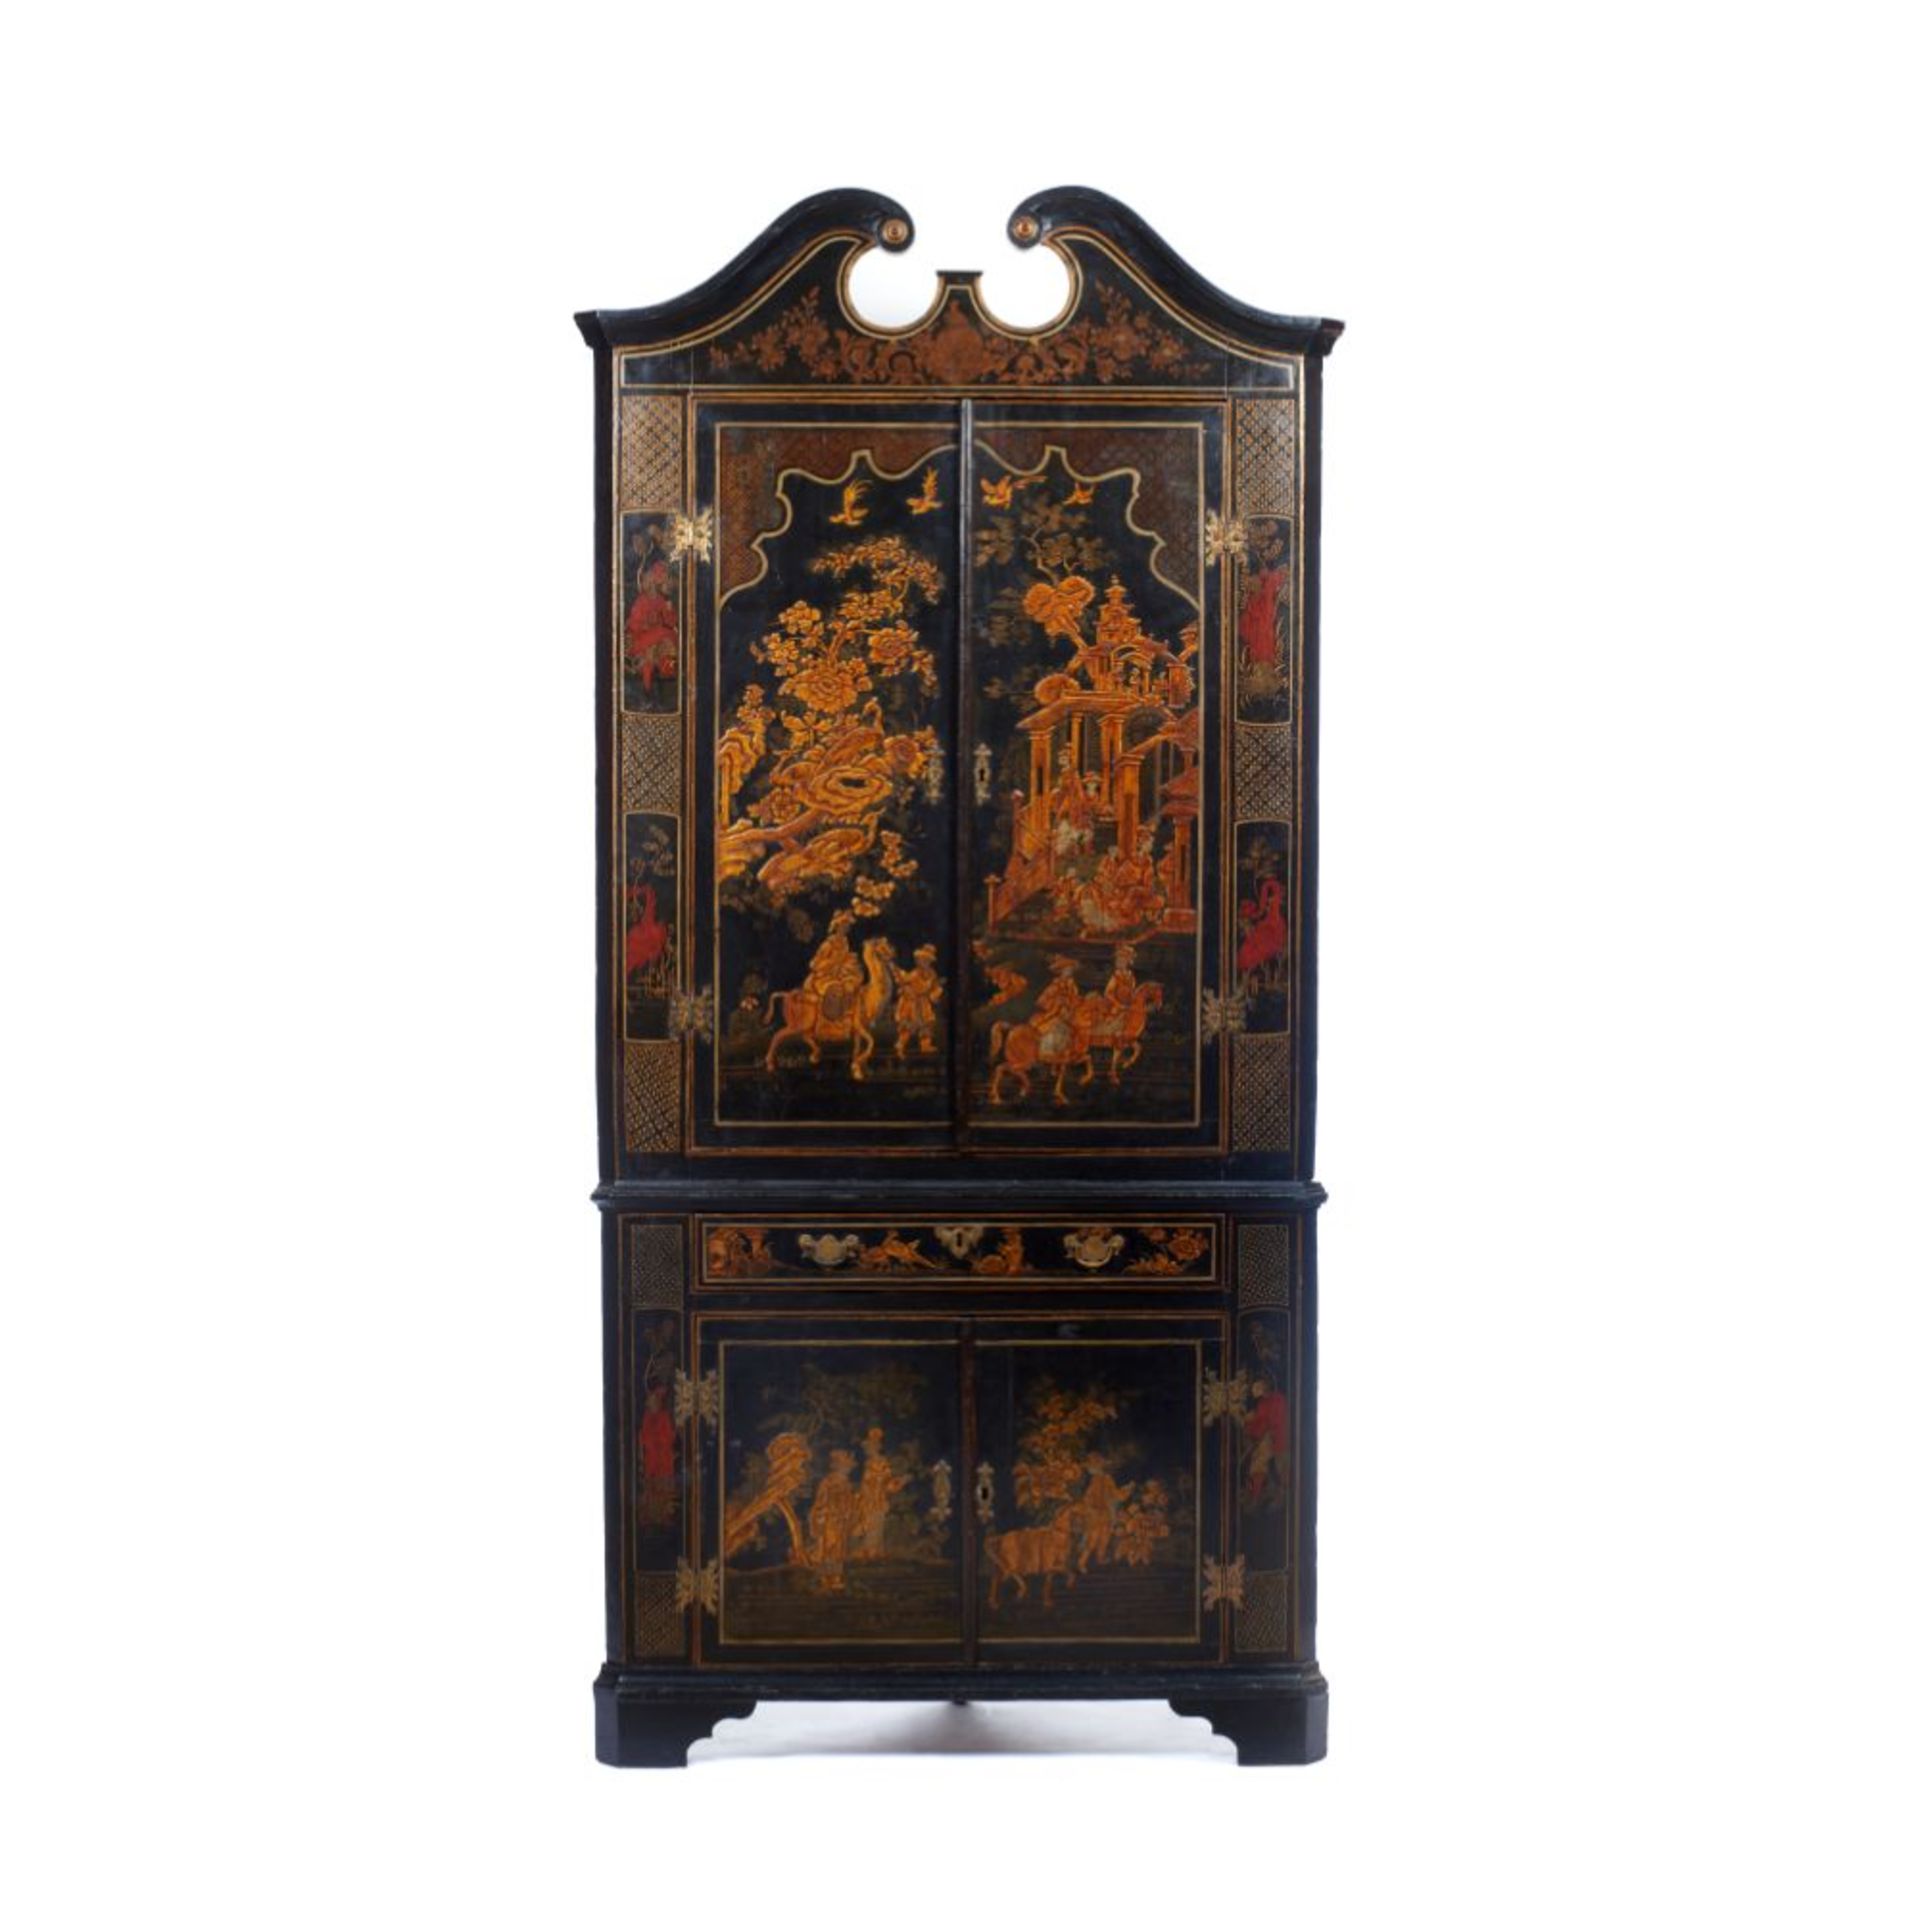 An unusual George III corner cabinet, Black lacquered wood, Red and brown oriental inspired